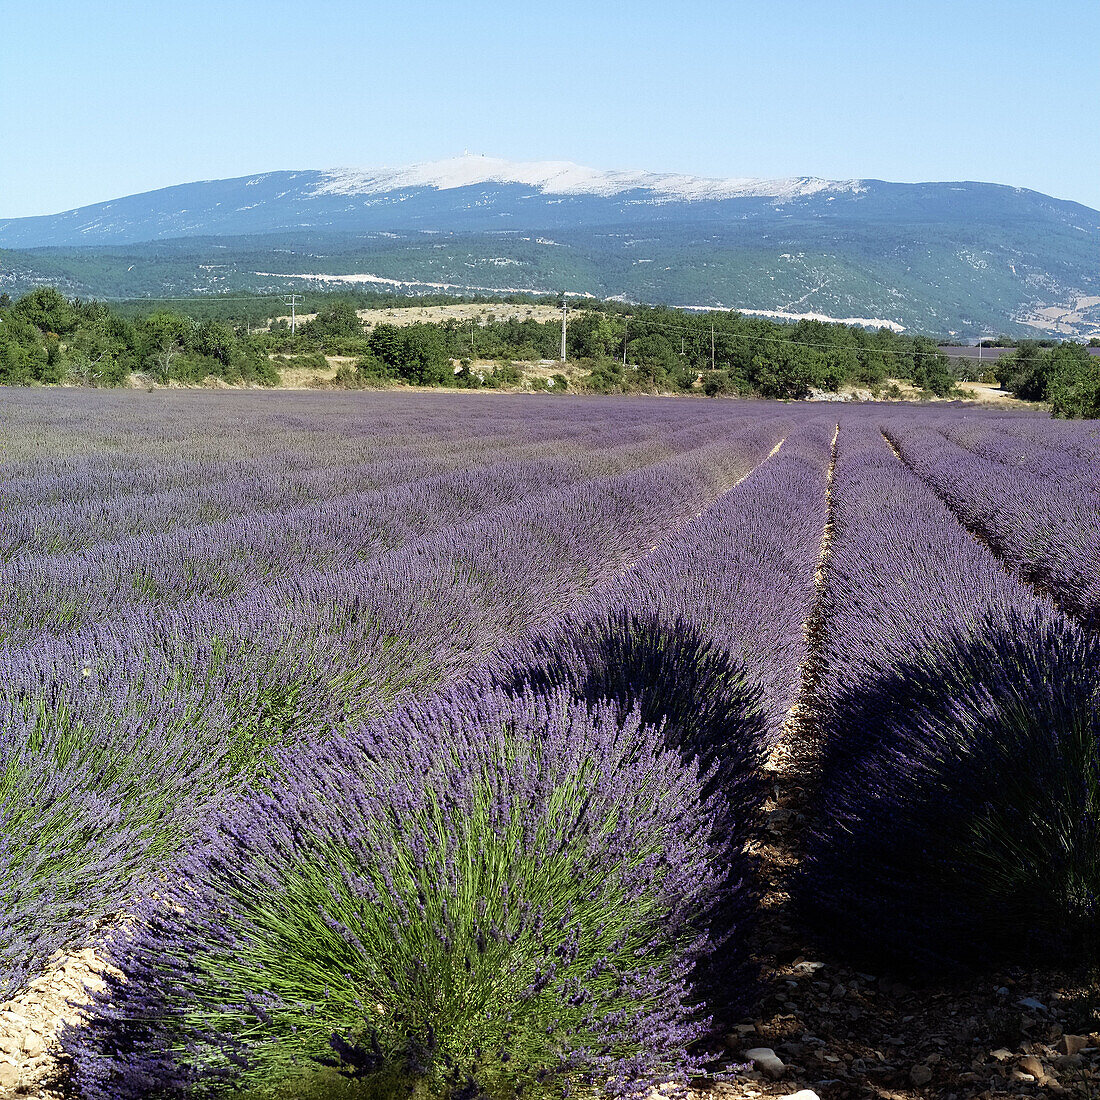 Blossoming lavender field and Mont Ventoux mountain. Vaucluse, Provence. France.